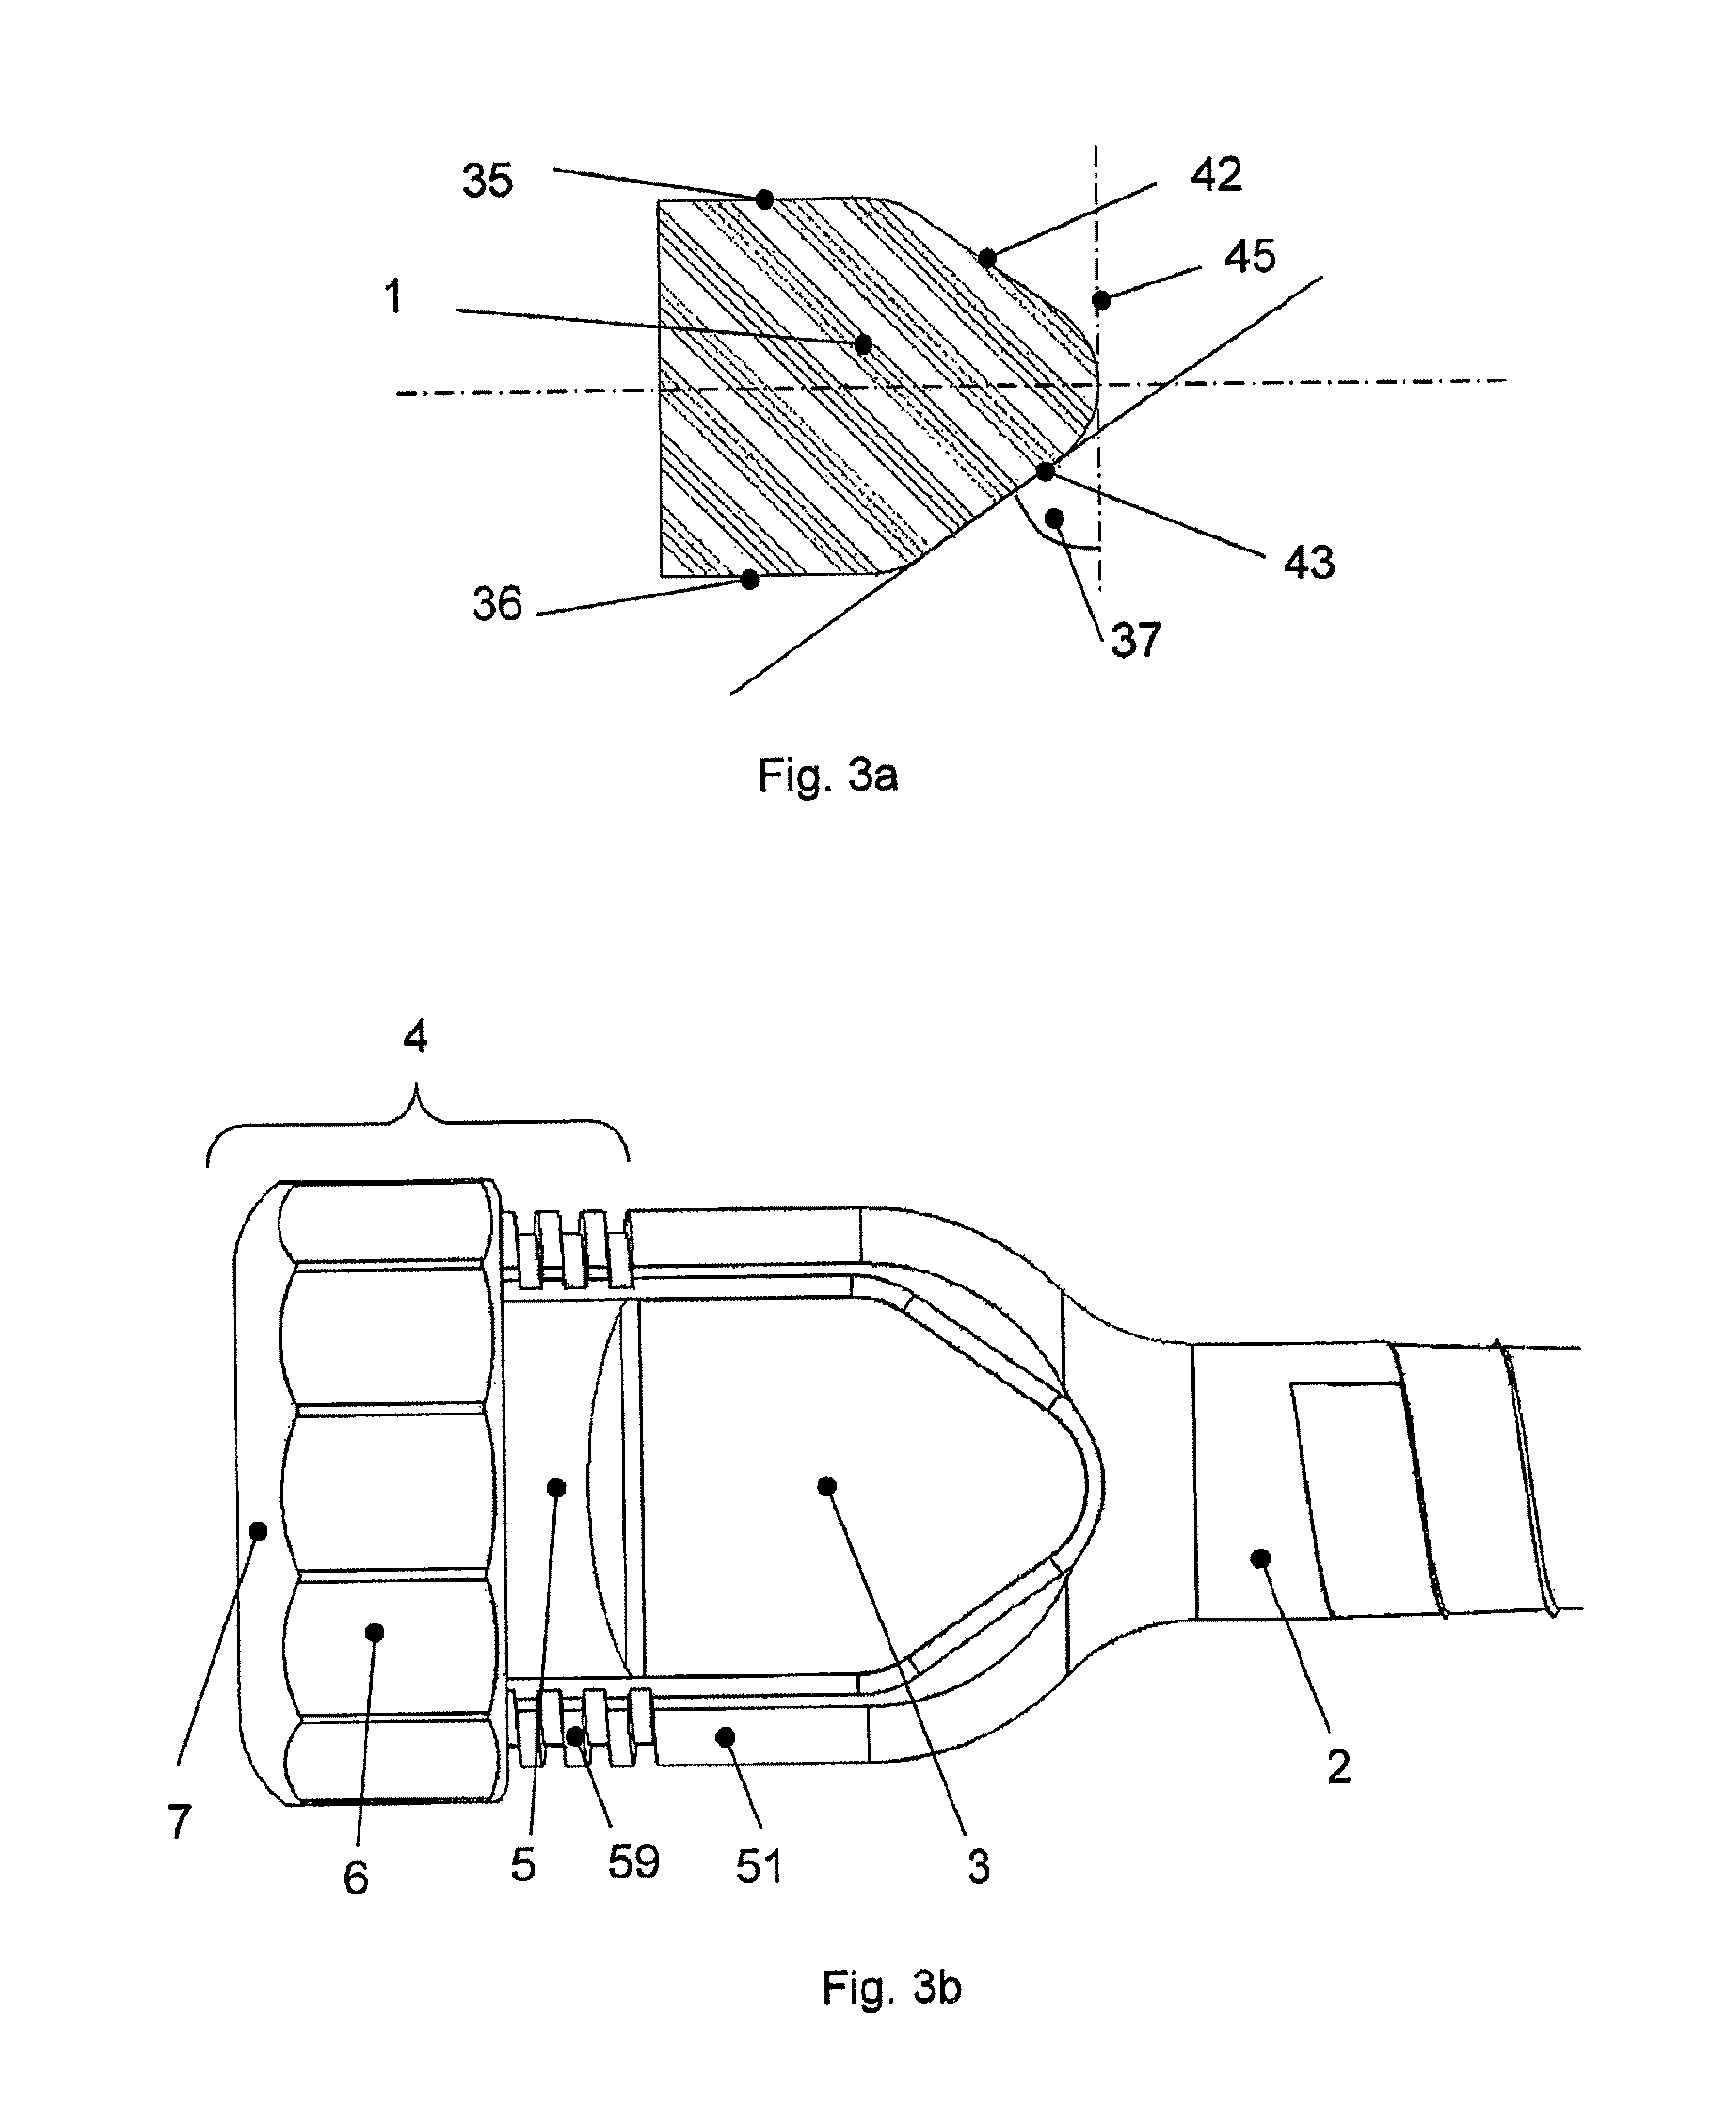 Anchorage arrangement for a connecting rod for the stabilization of the spine